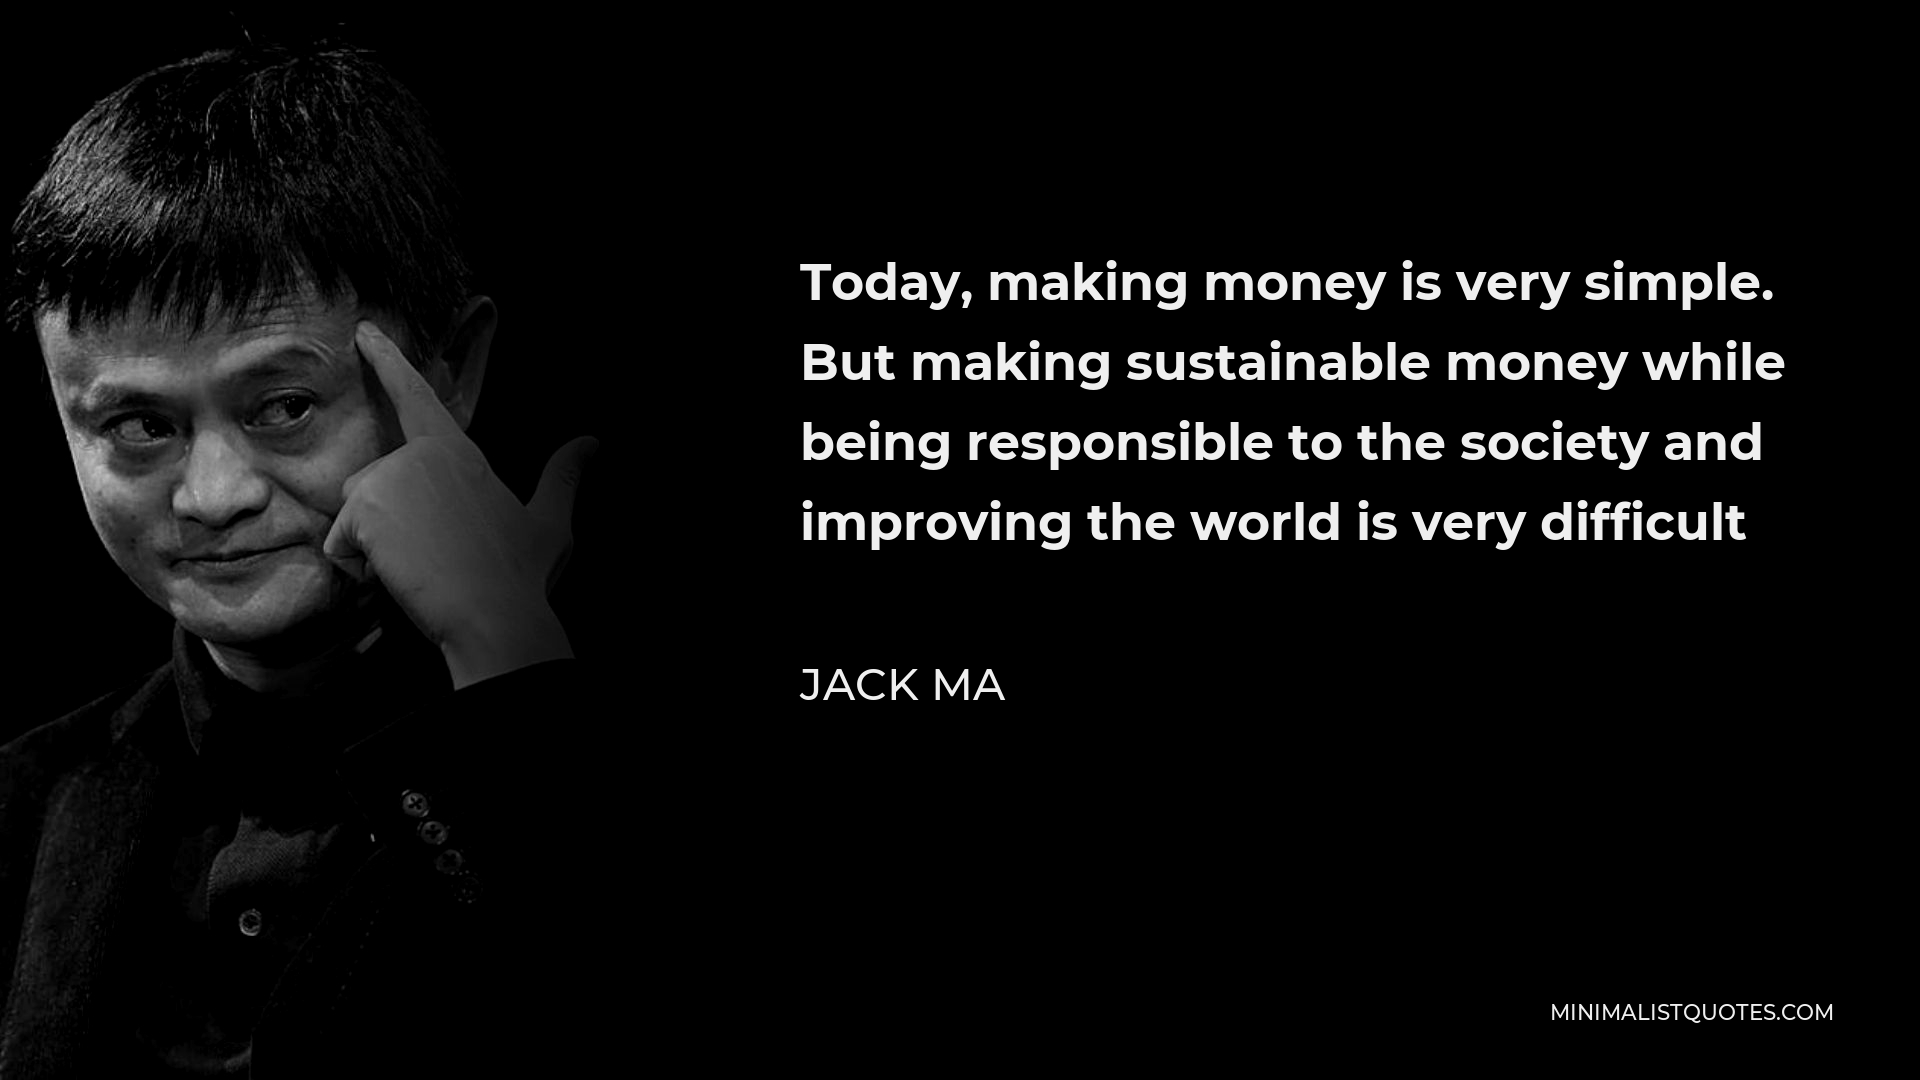 Jack Ma Quote - Today, making money is very simple. But making sustainable money while being responsible to the society and improving the world is very difficult